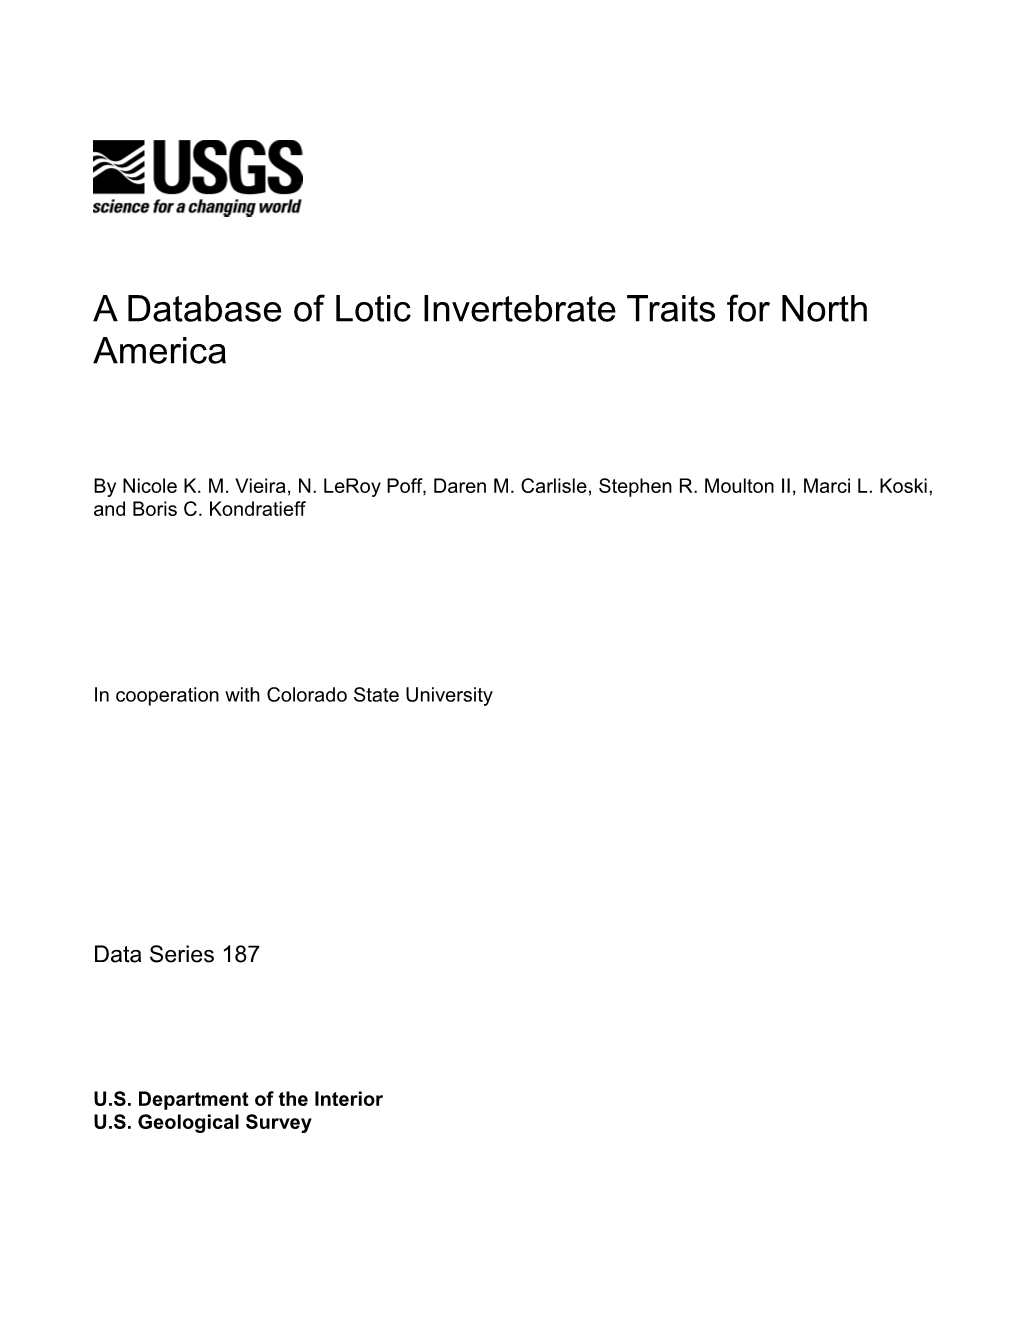 A Database of Lotic Invertebrate Traits for North America